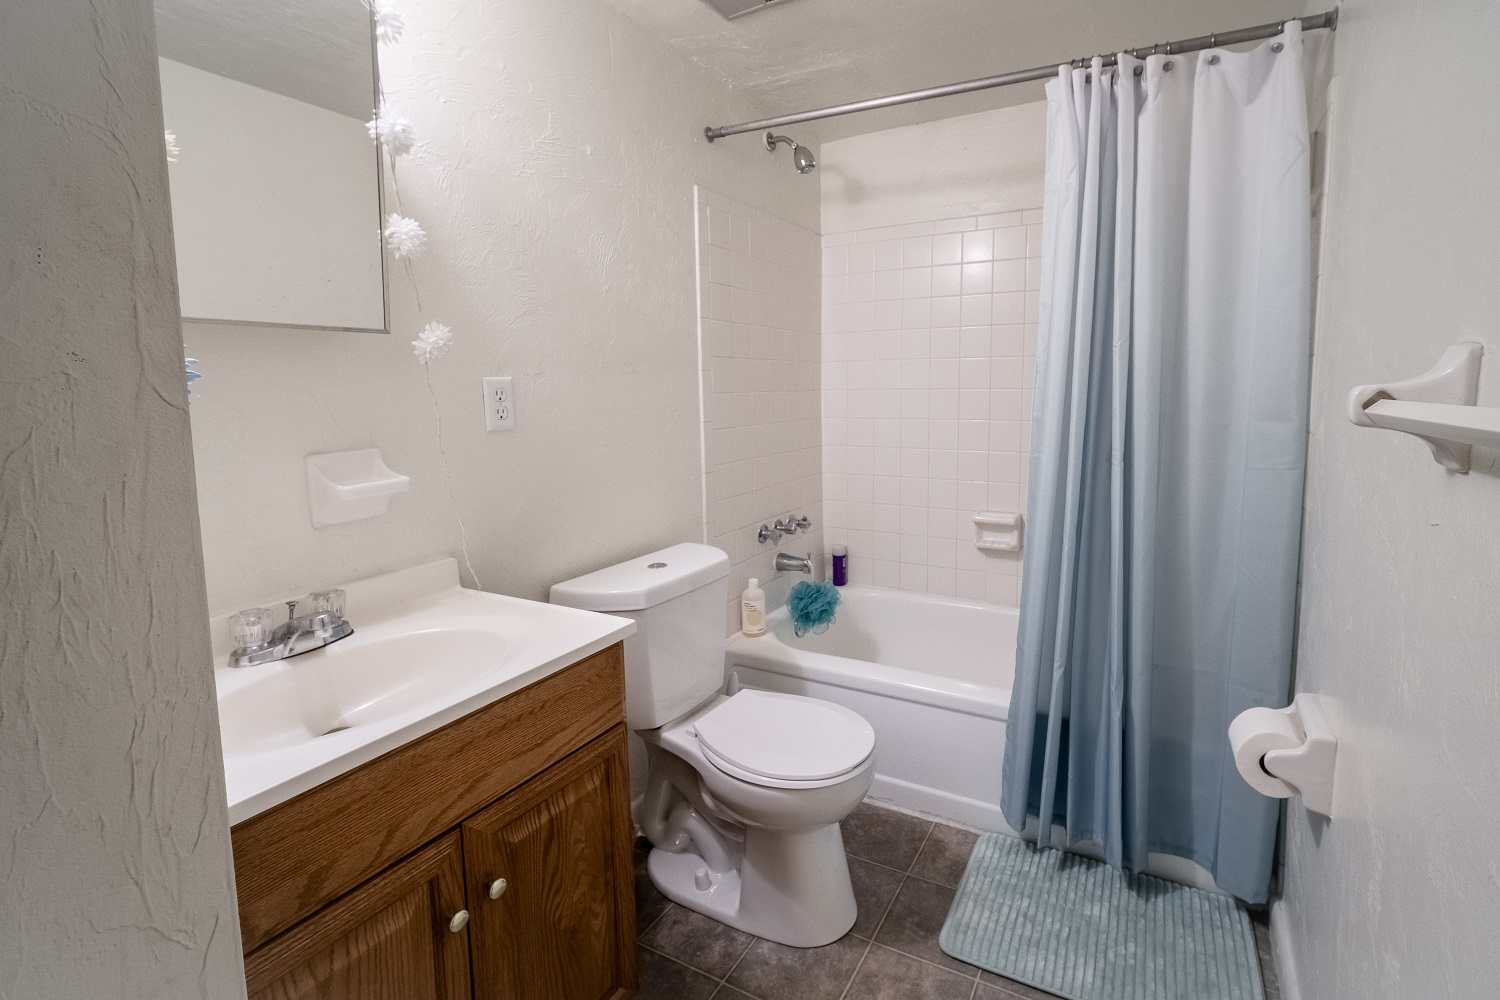 Newly remodeled bathrooms and fixtures